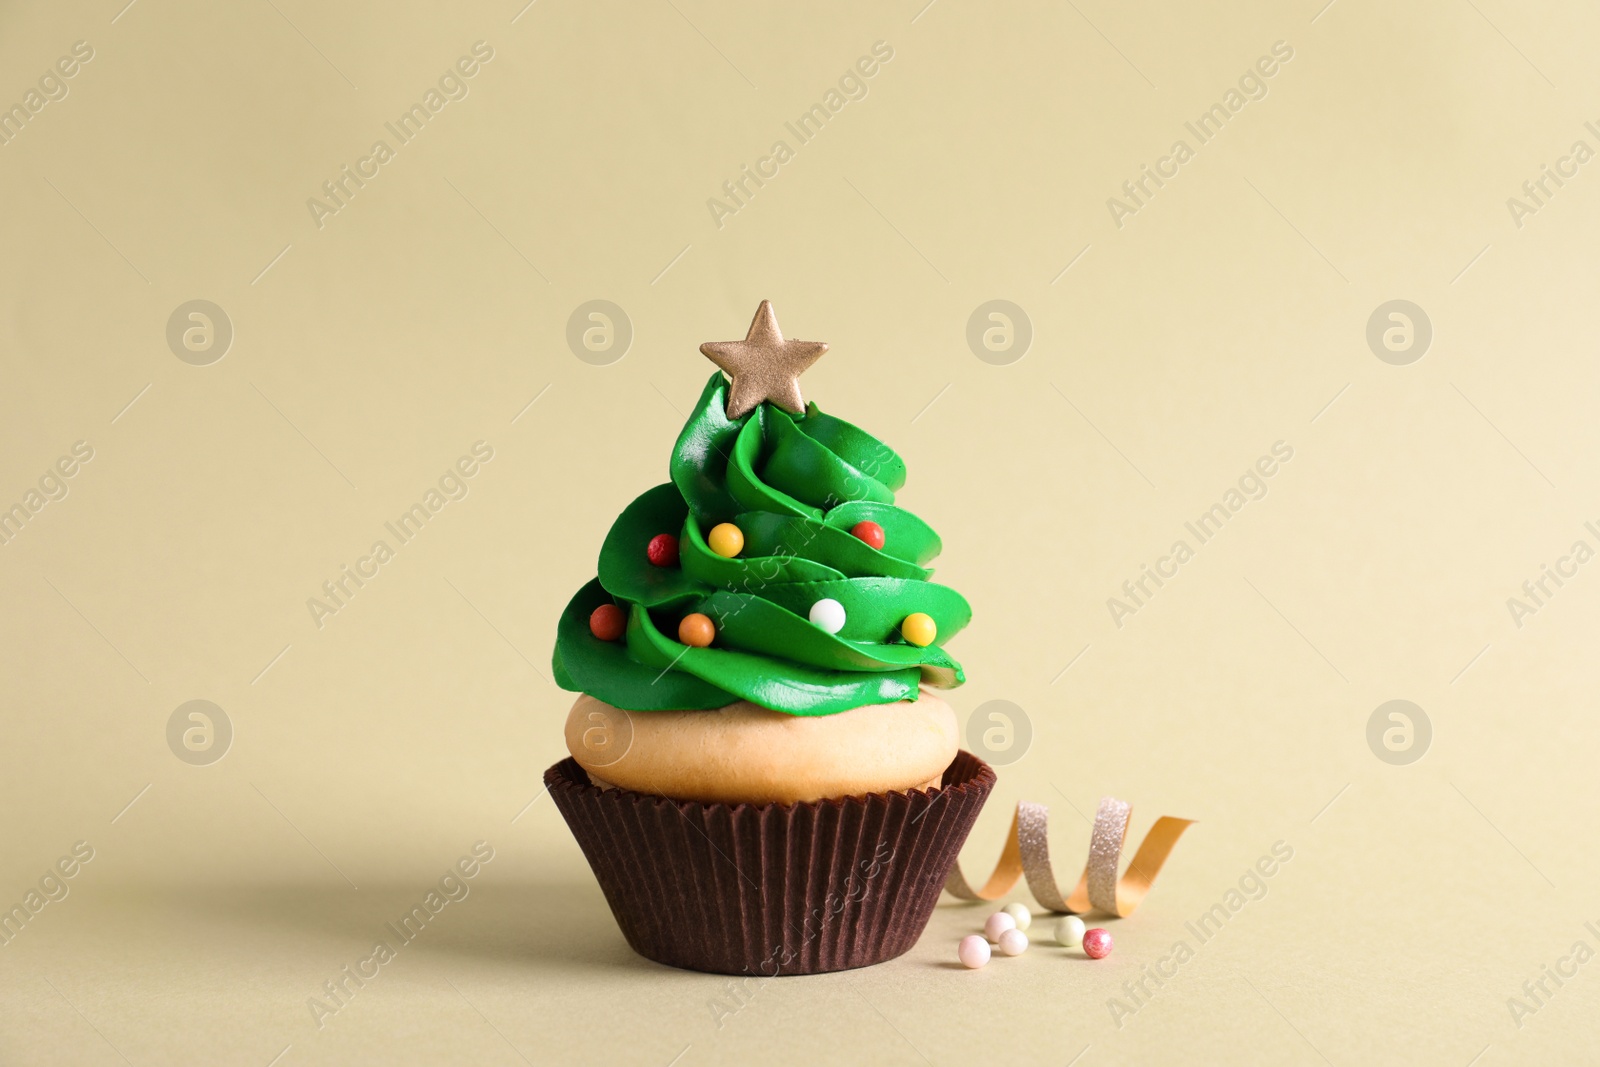 Photo of Christmas tree shaped cupcake and streamer on green background